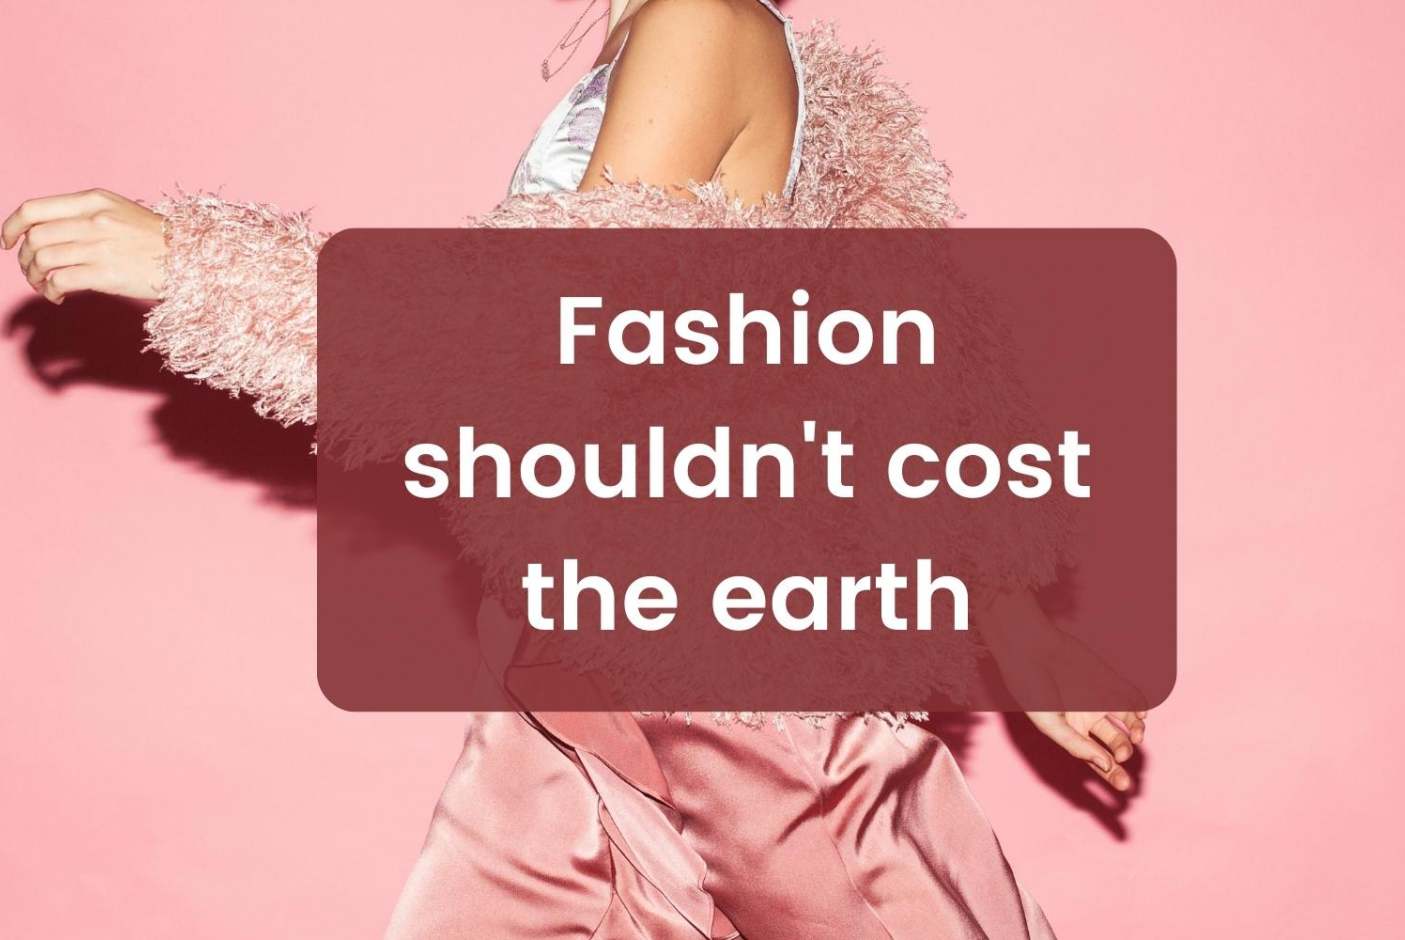 What is fast fashion and why a problem? | Ethical Consumer